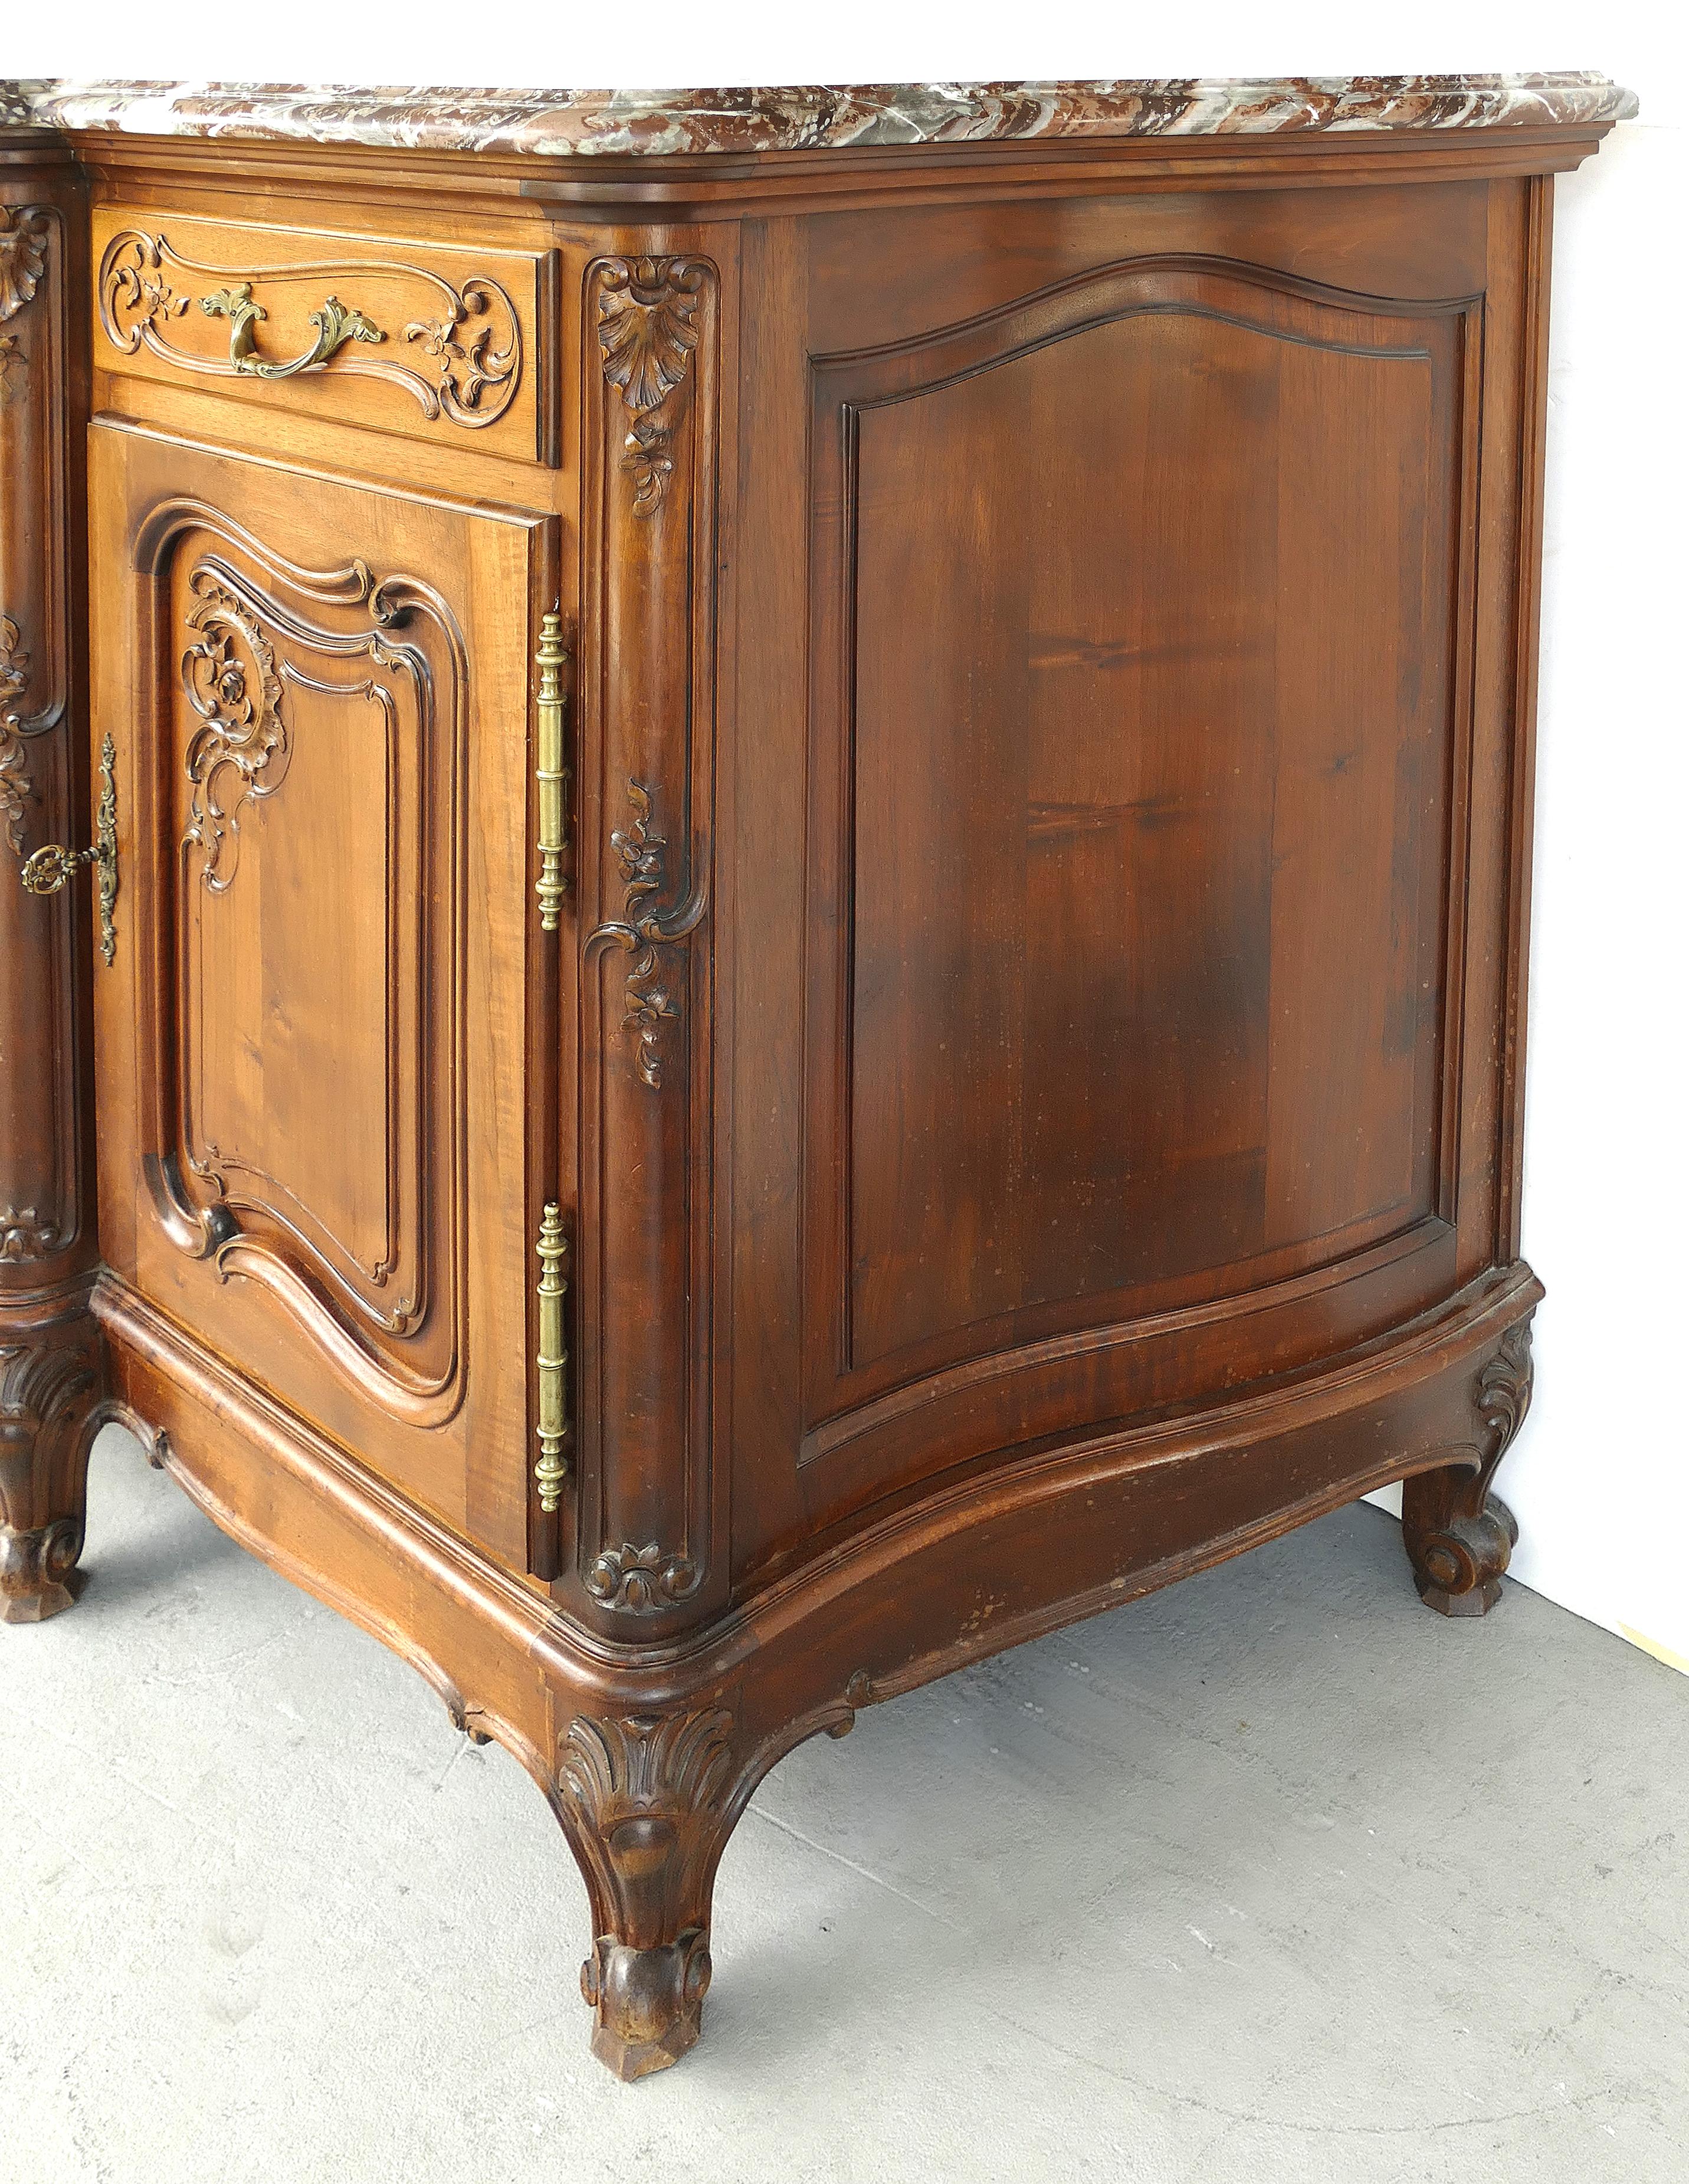 20th Century French Provincial Marble-Top Credenza/Sideboard in Carved Walnut